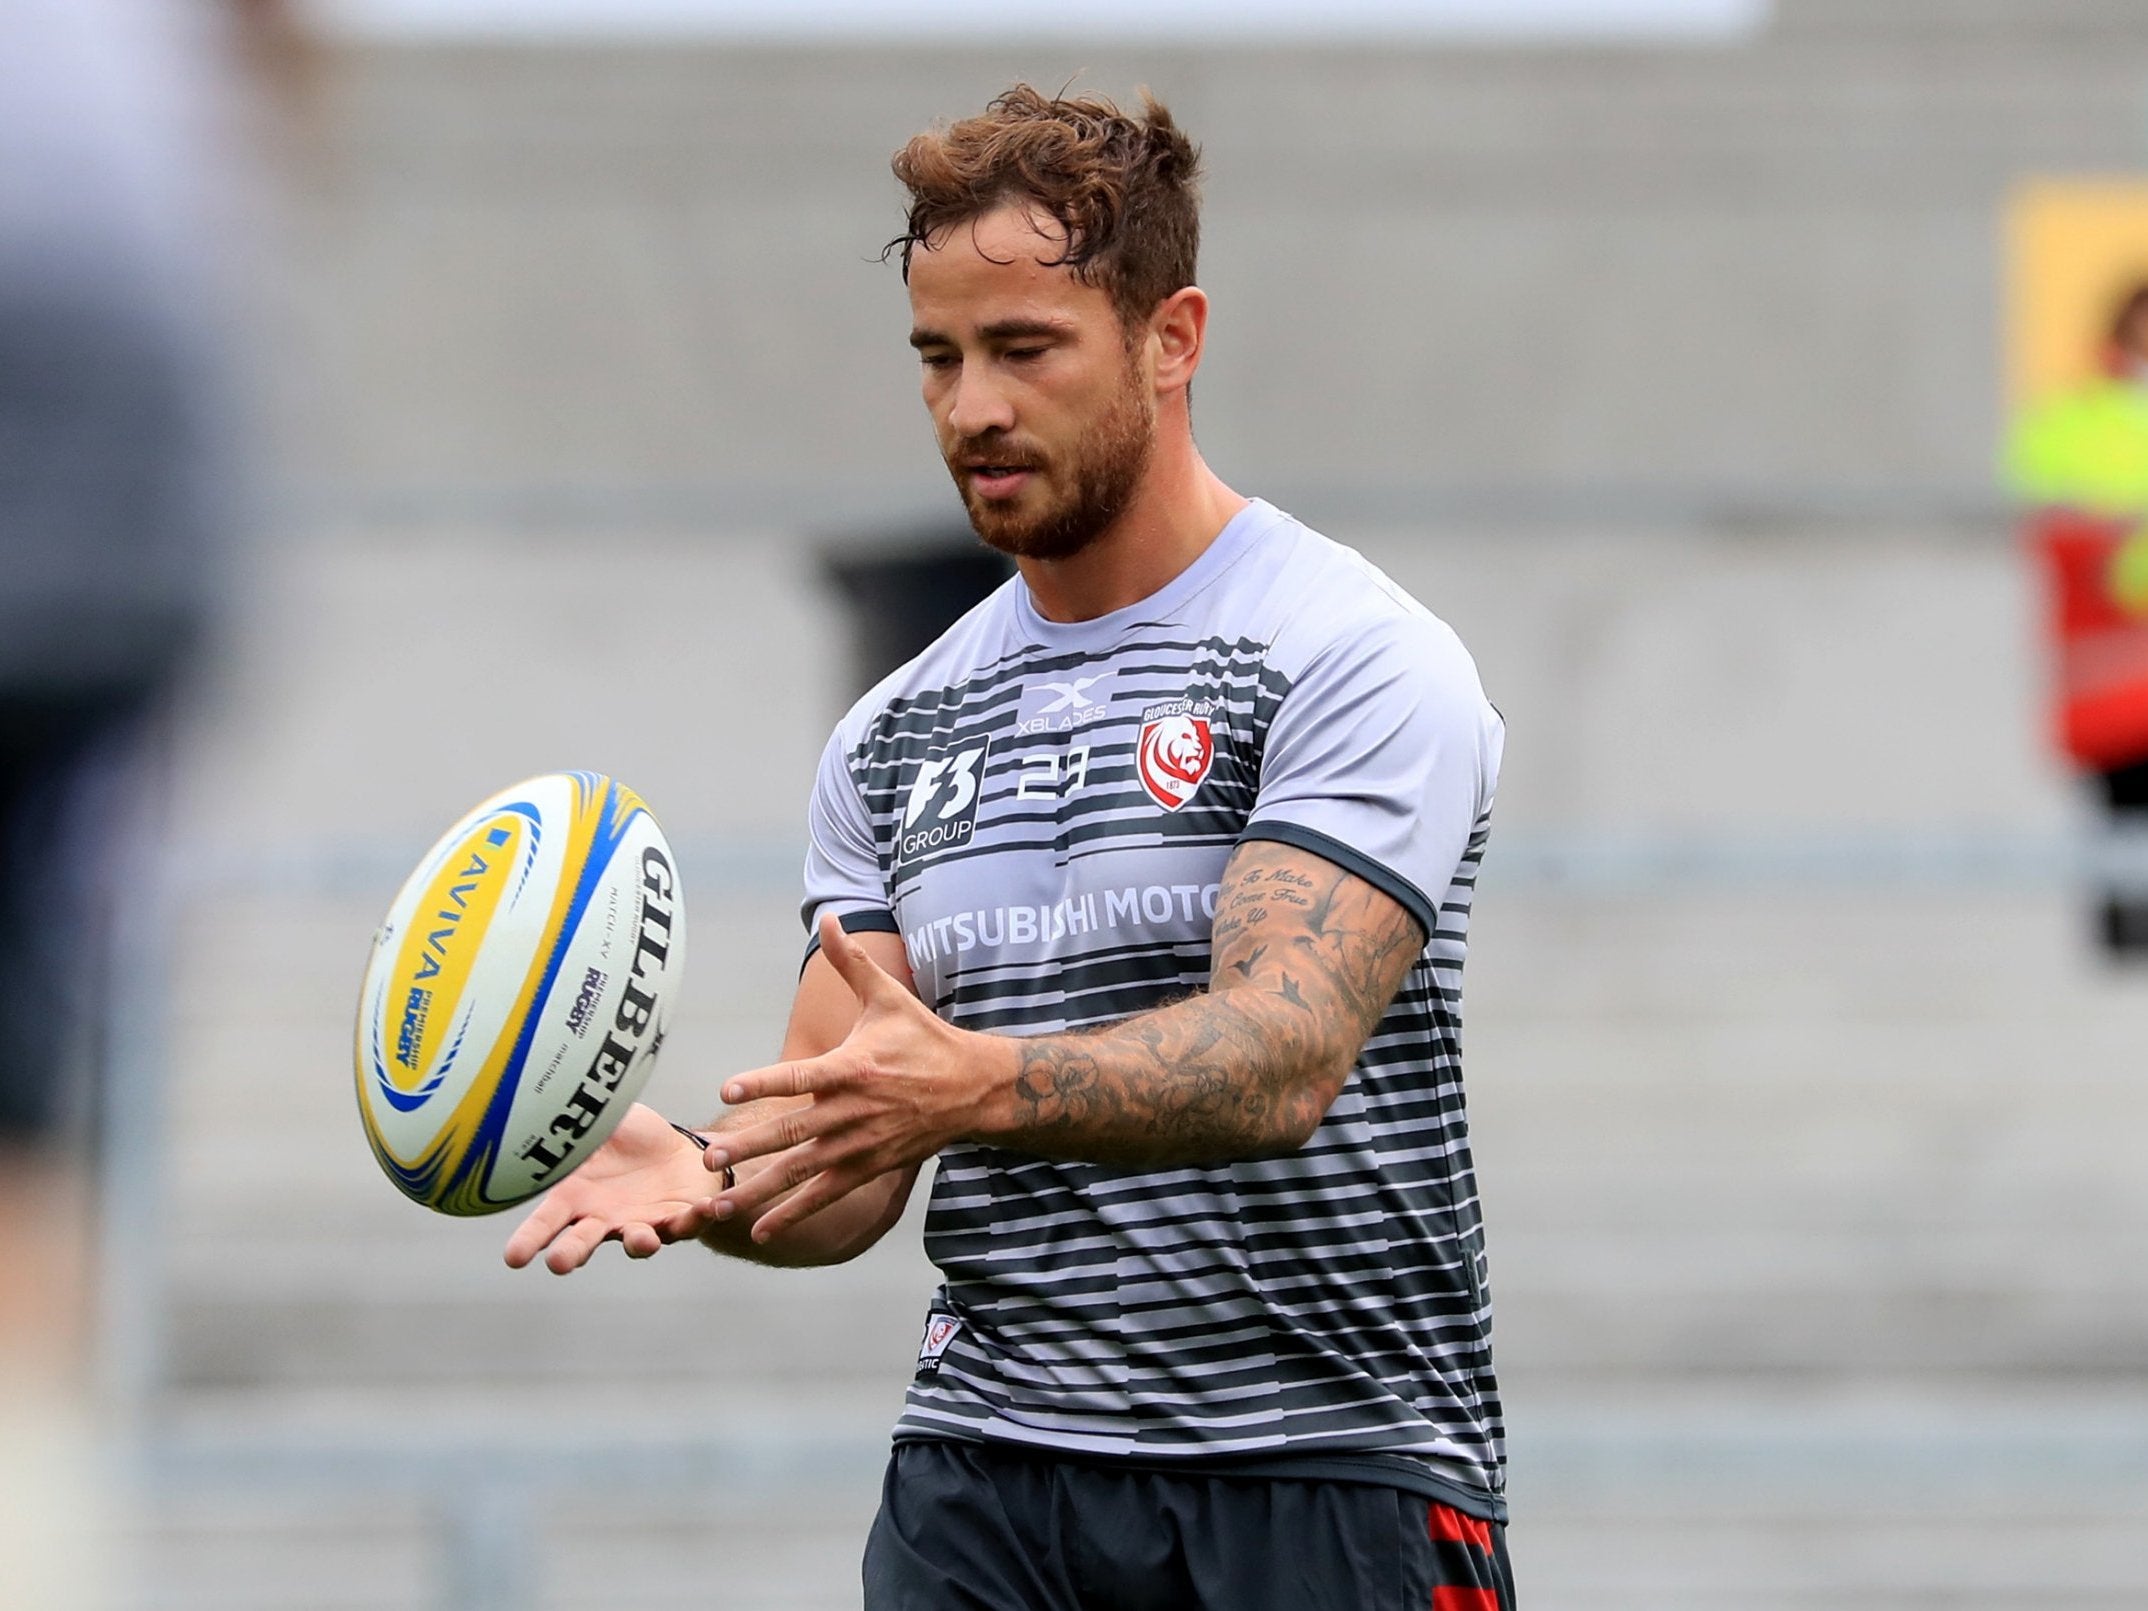 Danny Cipriani will face an disciplinary hearing after the RFU charged him over his arrest